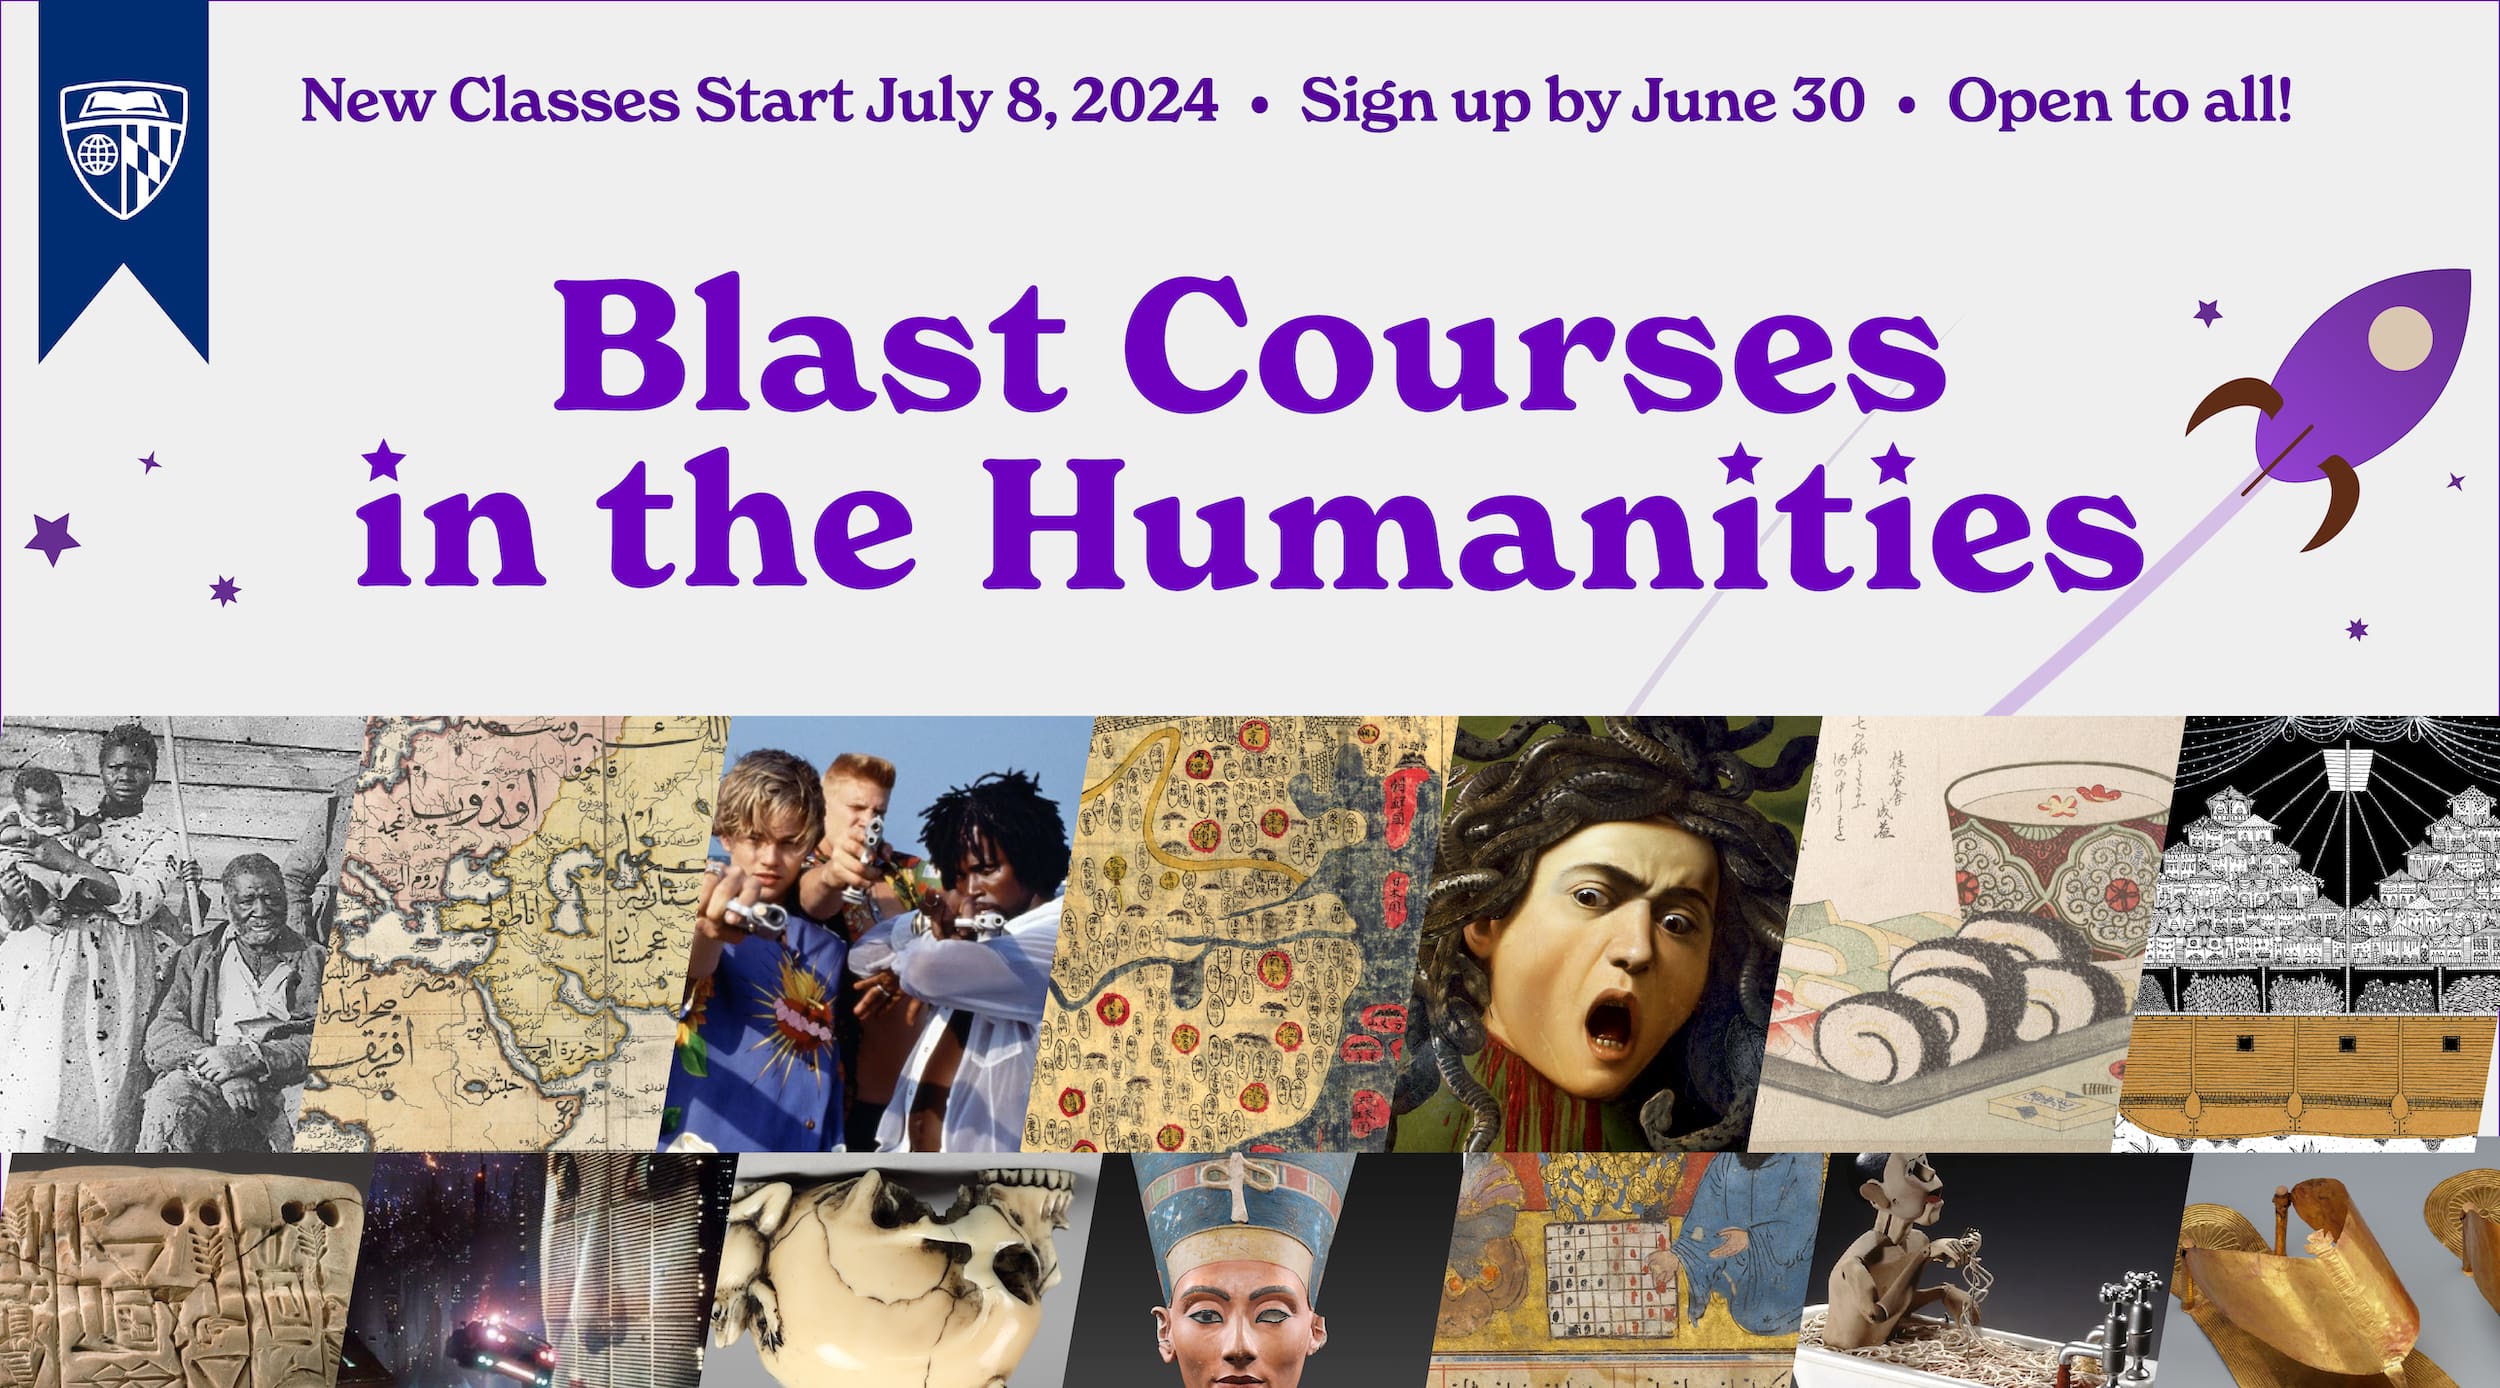 Banner for "Blast Courses in the Humanities" stating "new classes begin July 8, registration ends June 30, open to all!" Below text are 14 tiles with images of various historical, cultural, and imaginative artifacts.